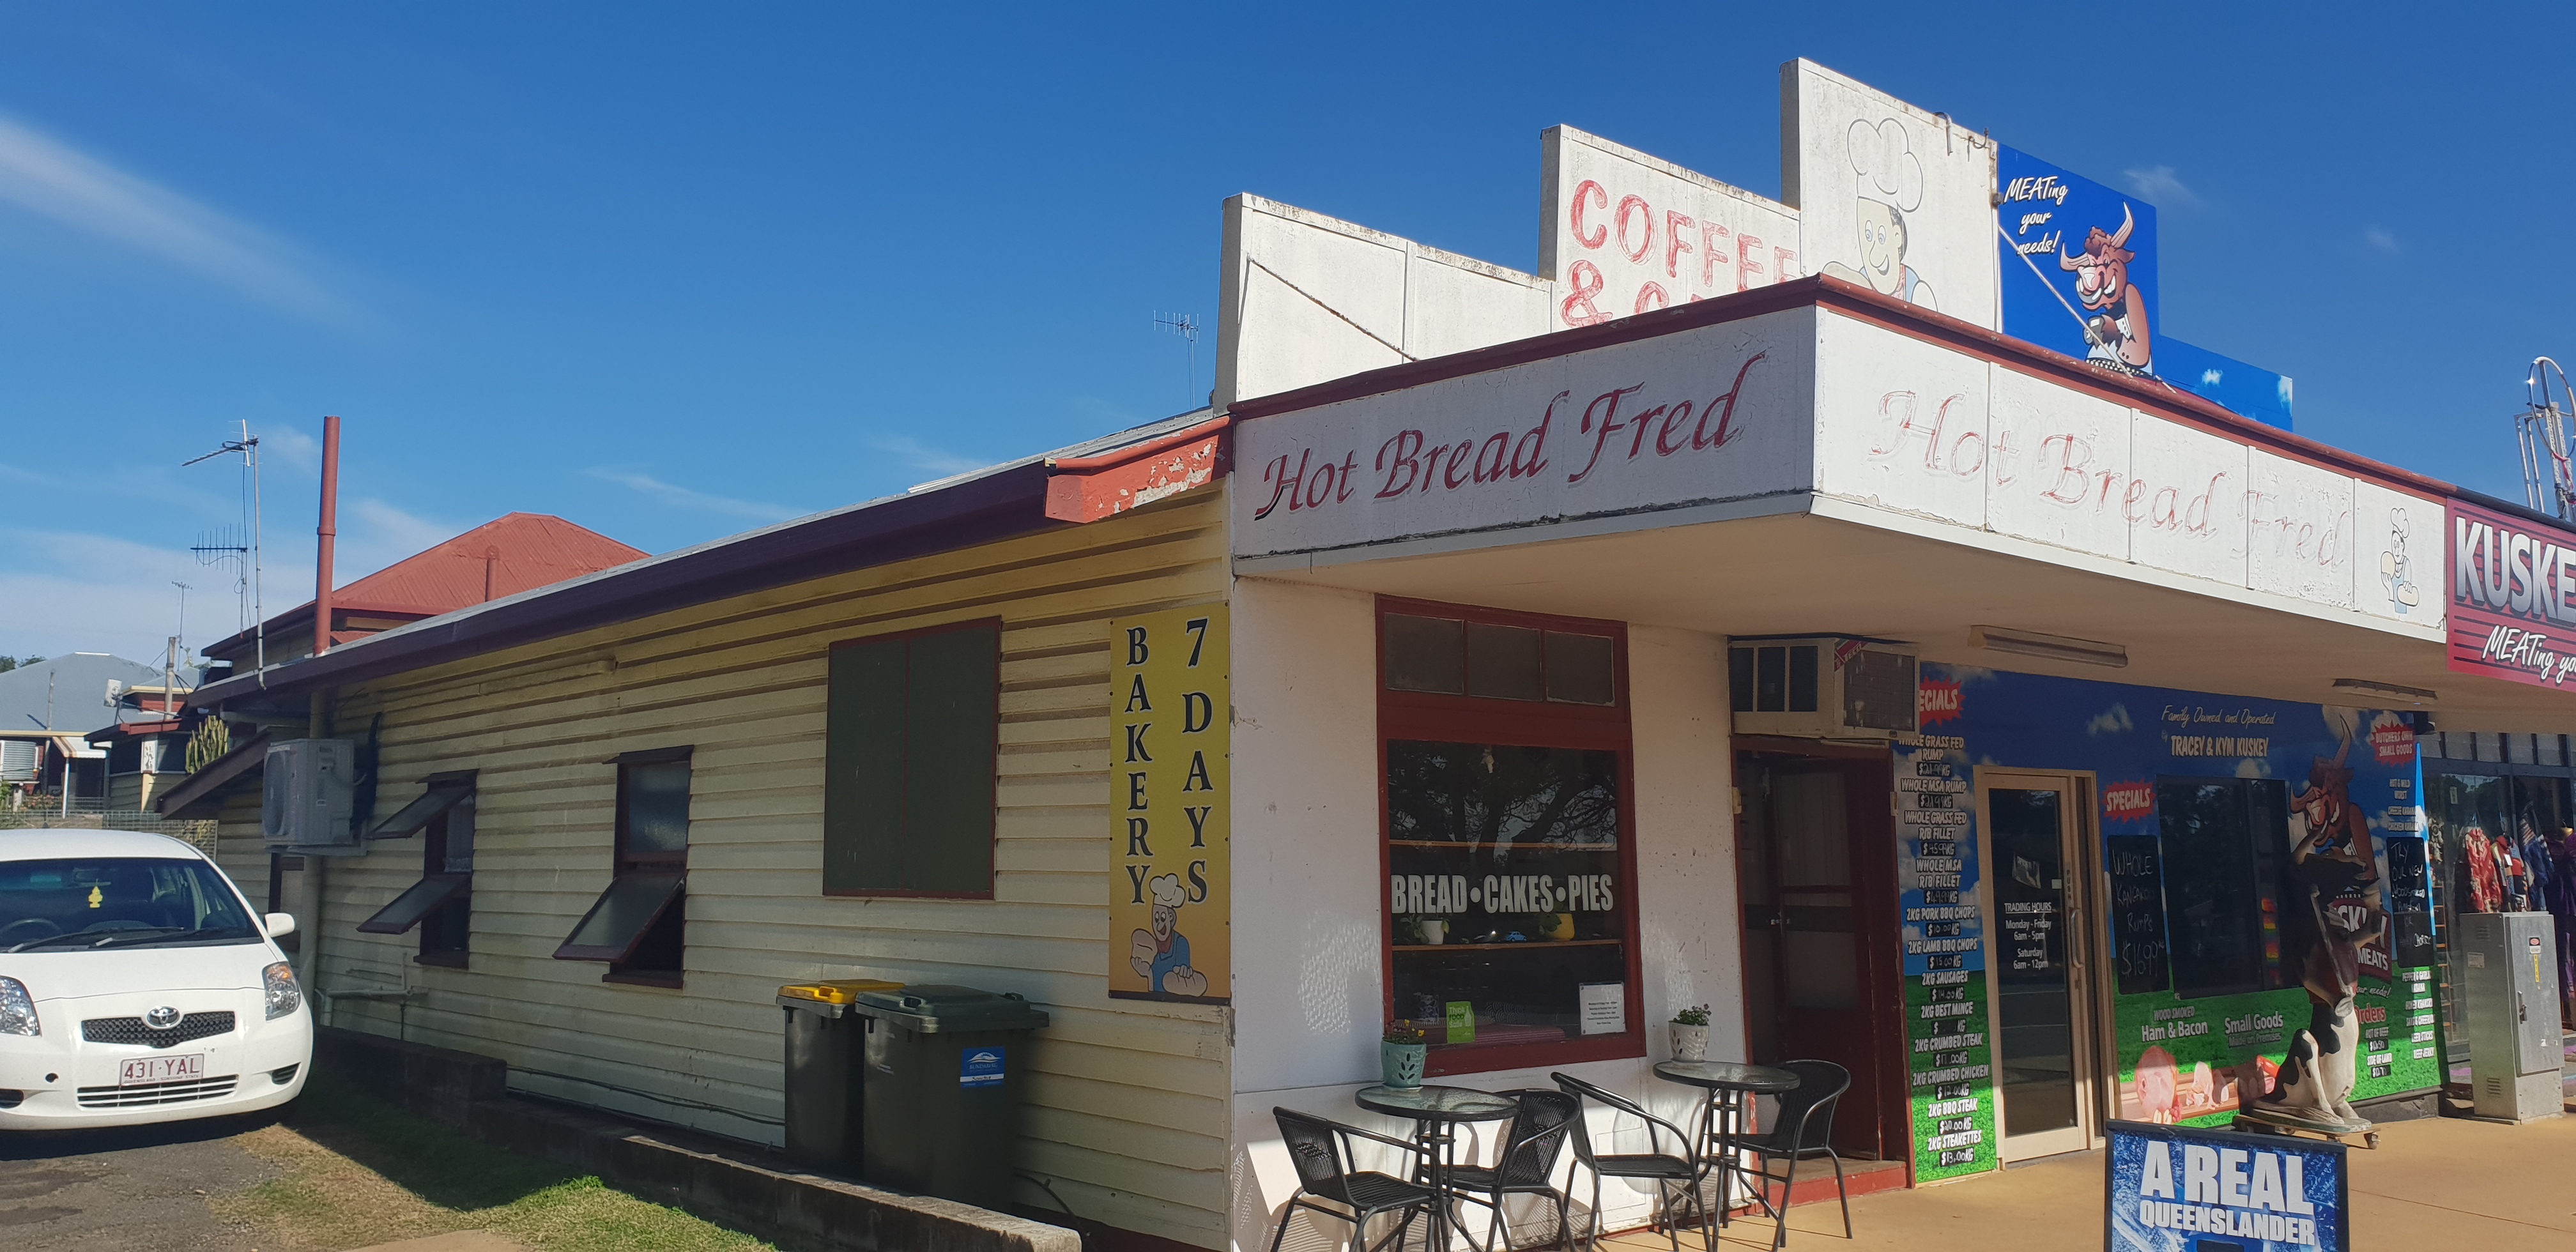 Hot Bread Fred is Up for SaleBusiness For Sale